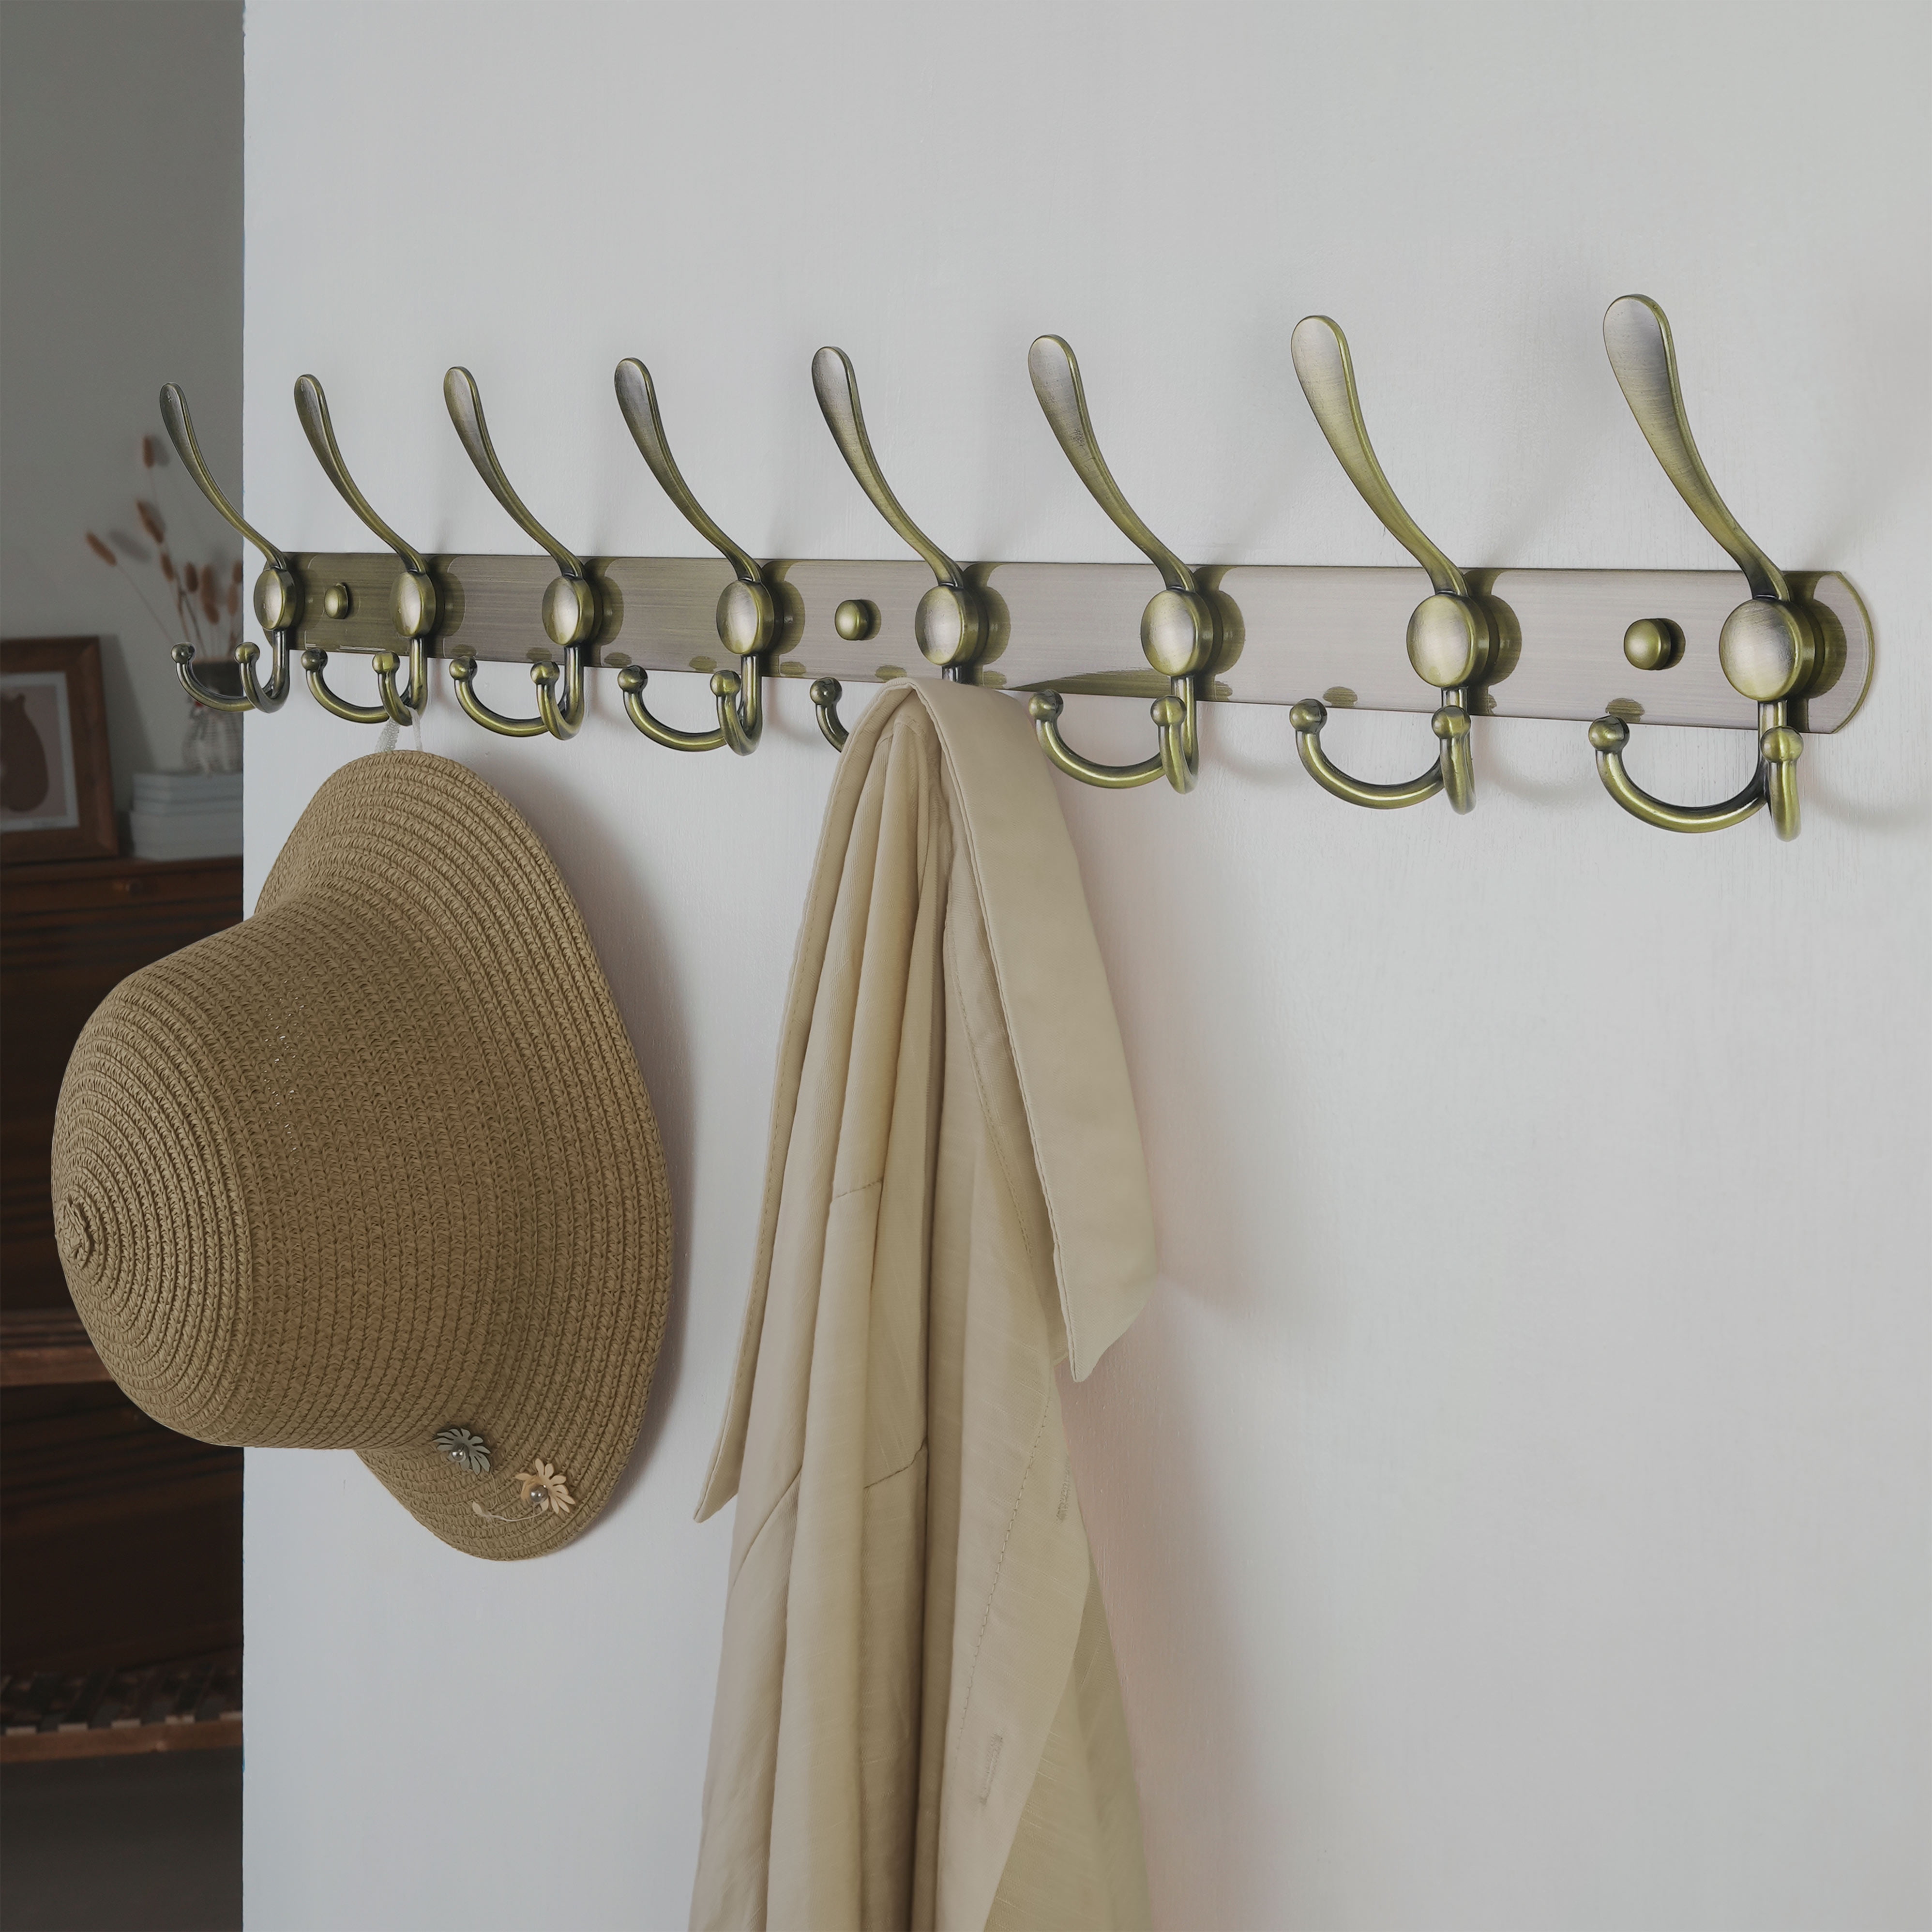 Dseap Wall Mounted Coat Rack - 10 Tri Hooks, 37-5/8 Long, 16Hole to Hole  - Heavy Duty Stainless Steel Coat Hook for Coat Hat Towel Robes Mudroom